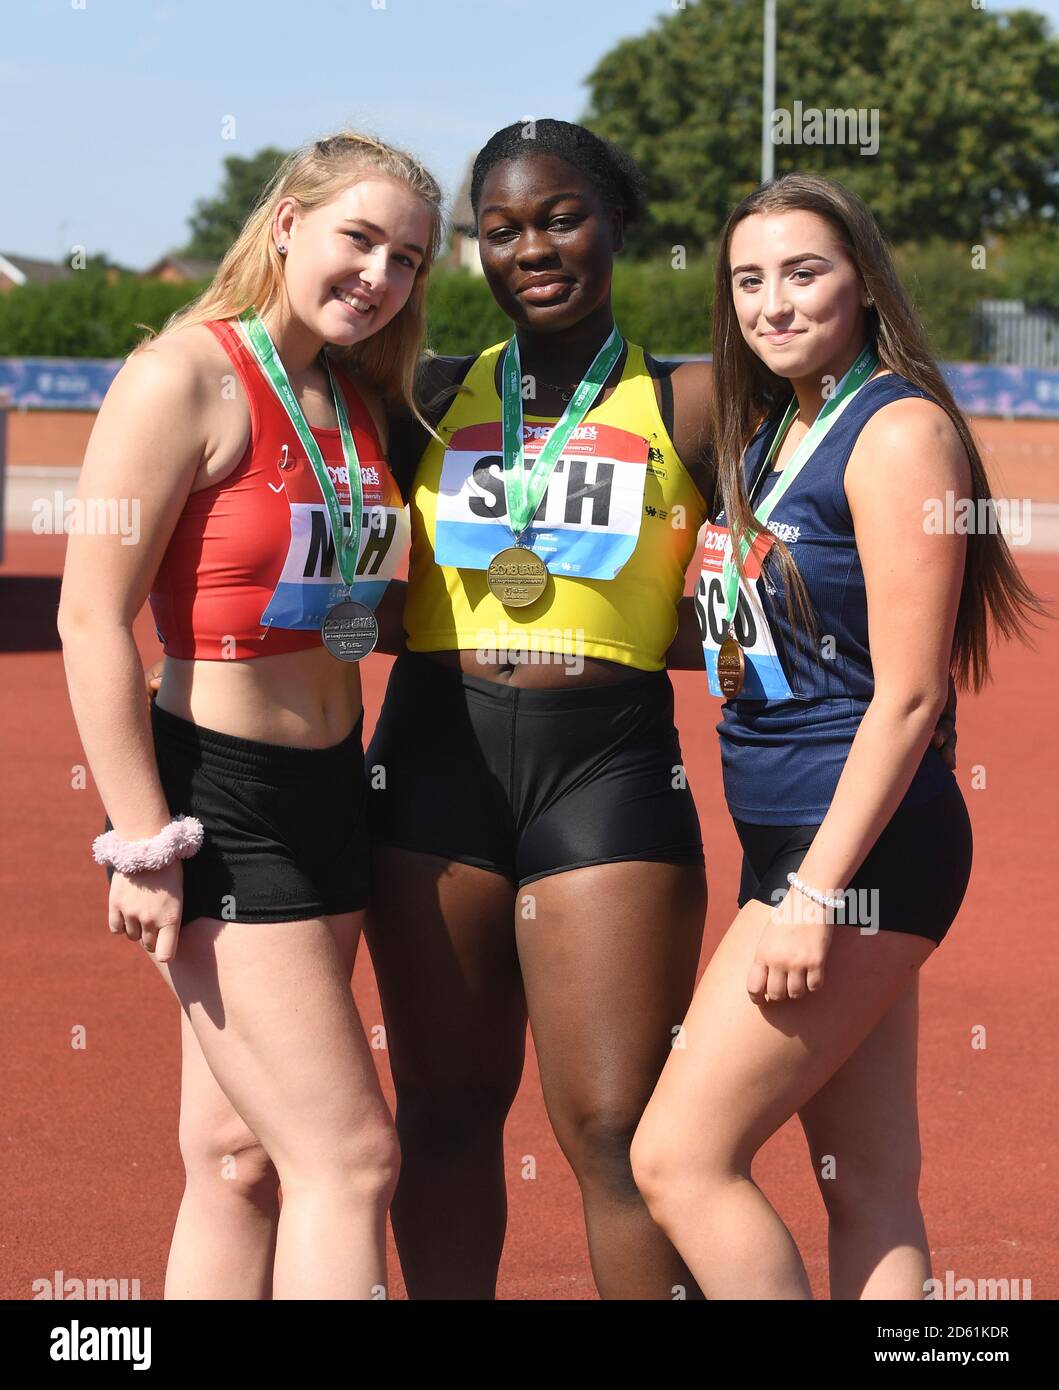 (left to right) Silver medalist England North's Kelsey Pearce, Gold medalist England South's Nana Gyedu and Bronze medalist Scotland's Hayley Berry in the girls shot put during day two of the athletics at the 2018 School Games held at Loughborough University. Stock Photo